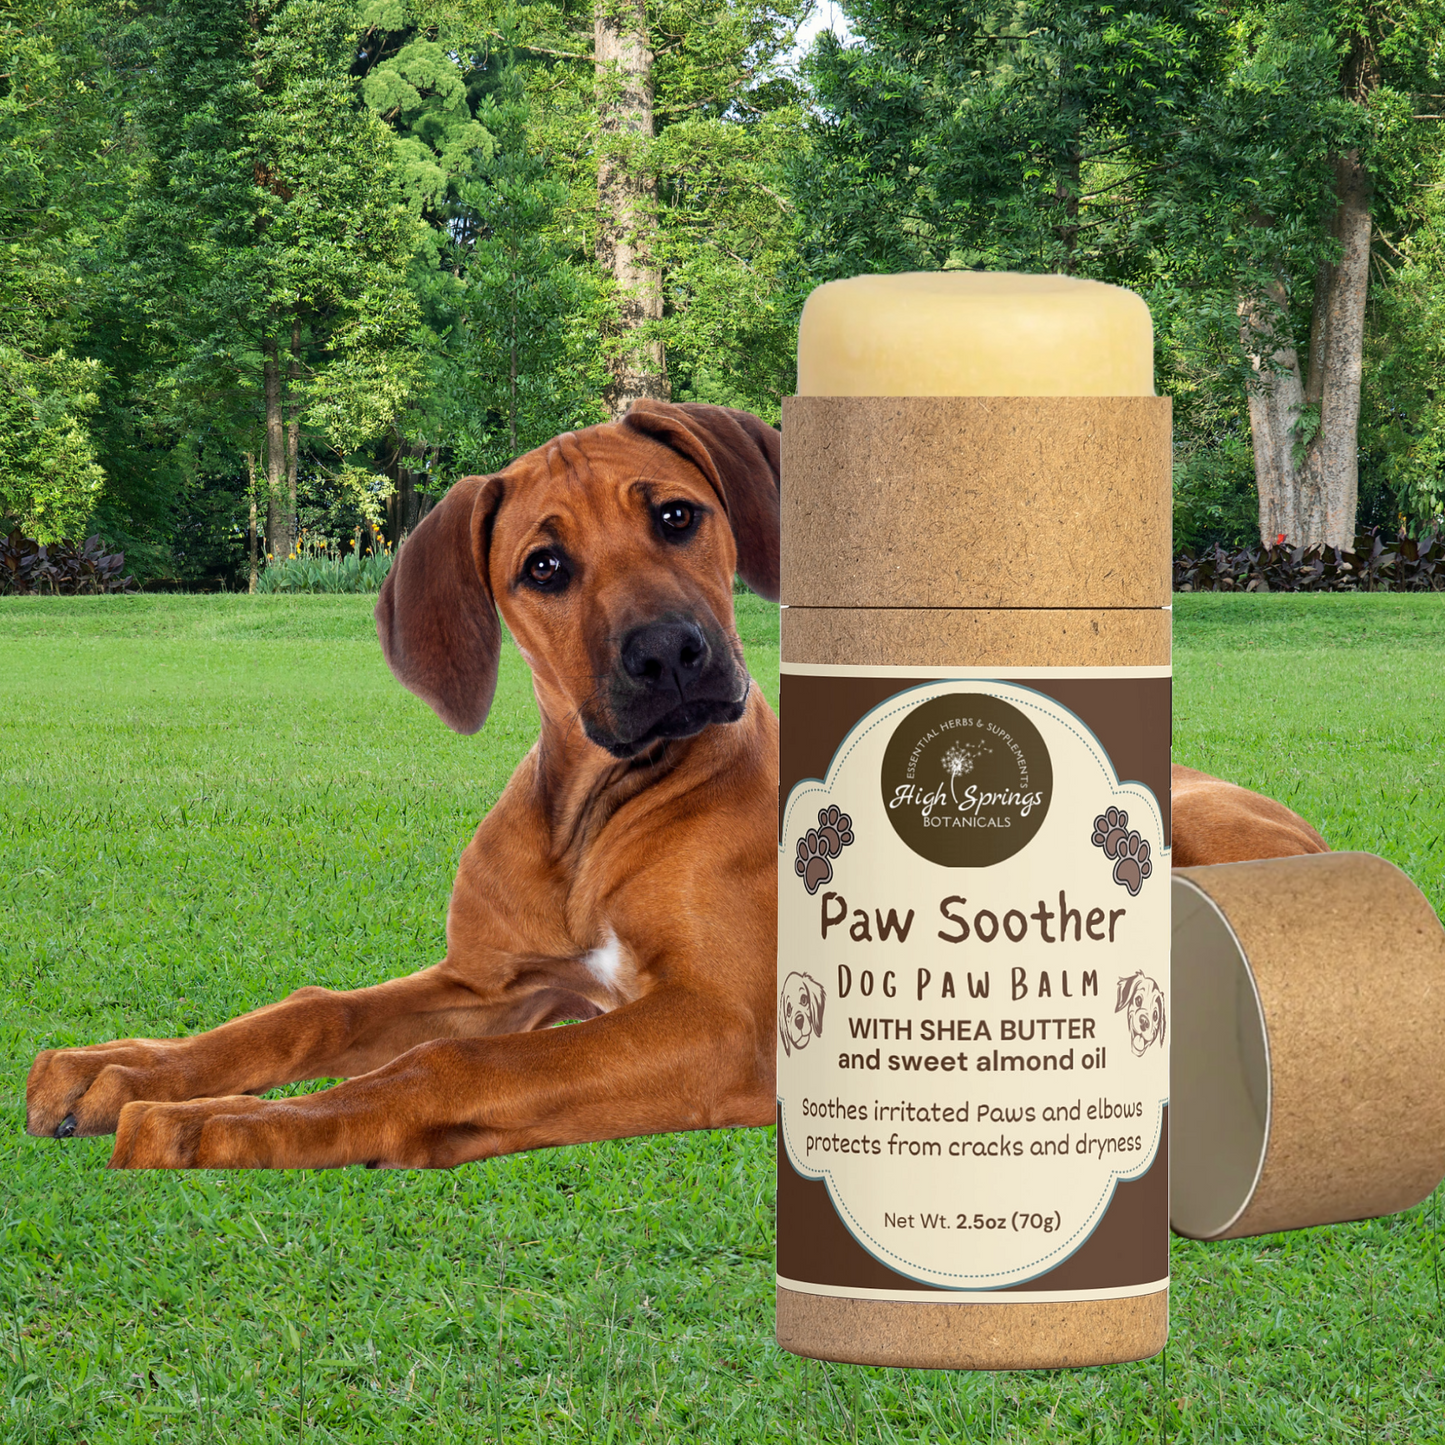 Paw Soother Balm for Dogs